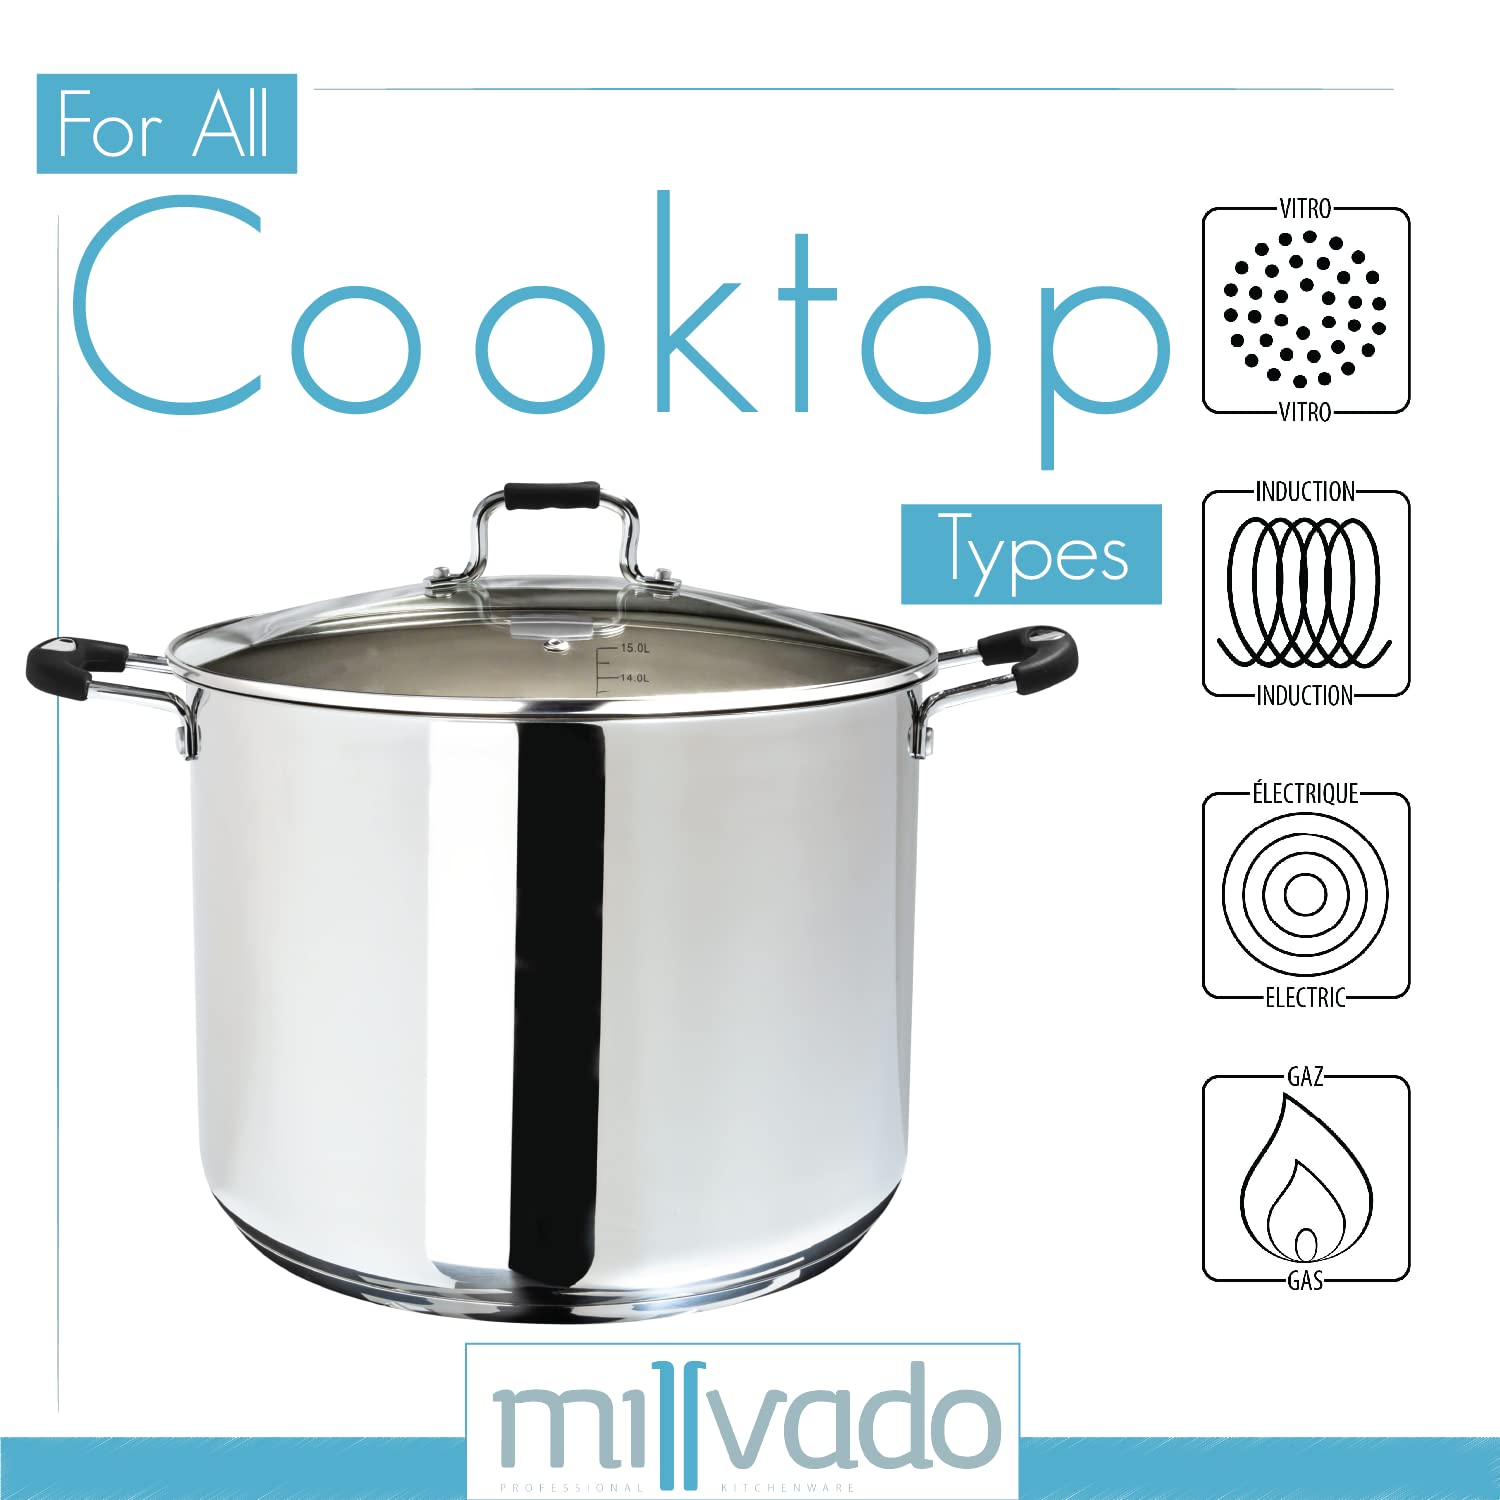 Millvado Stock Pot, Large Stainless Steel 17 Quart StockPot, Large Cooking Pot, Clear Glass Lid and Measurement Markings, Steam Hole, Induction, Gas, Electric Compatible Big Boiling Pot - image 3 of 7